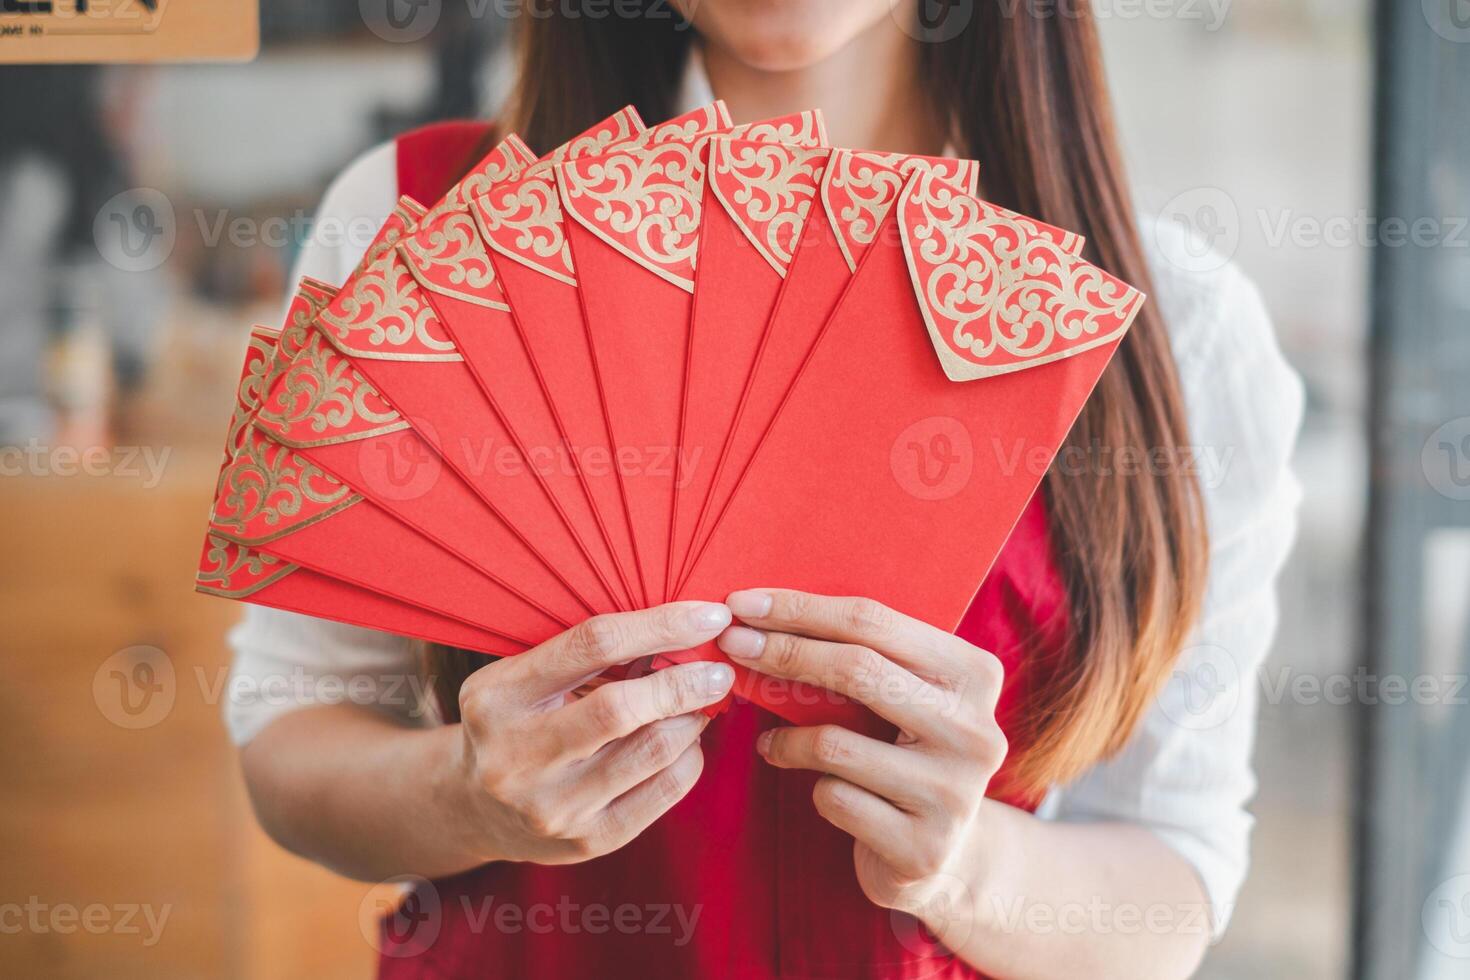 A close-up of a woman holding a fan of ornate red envelopes, a traditional symbol of luck and prosperity in Asian cultures, often exchanged during special occasions. photo